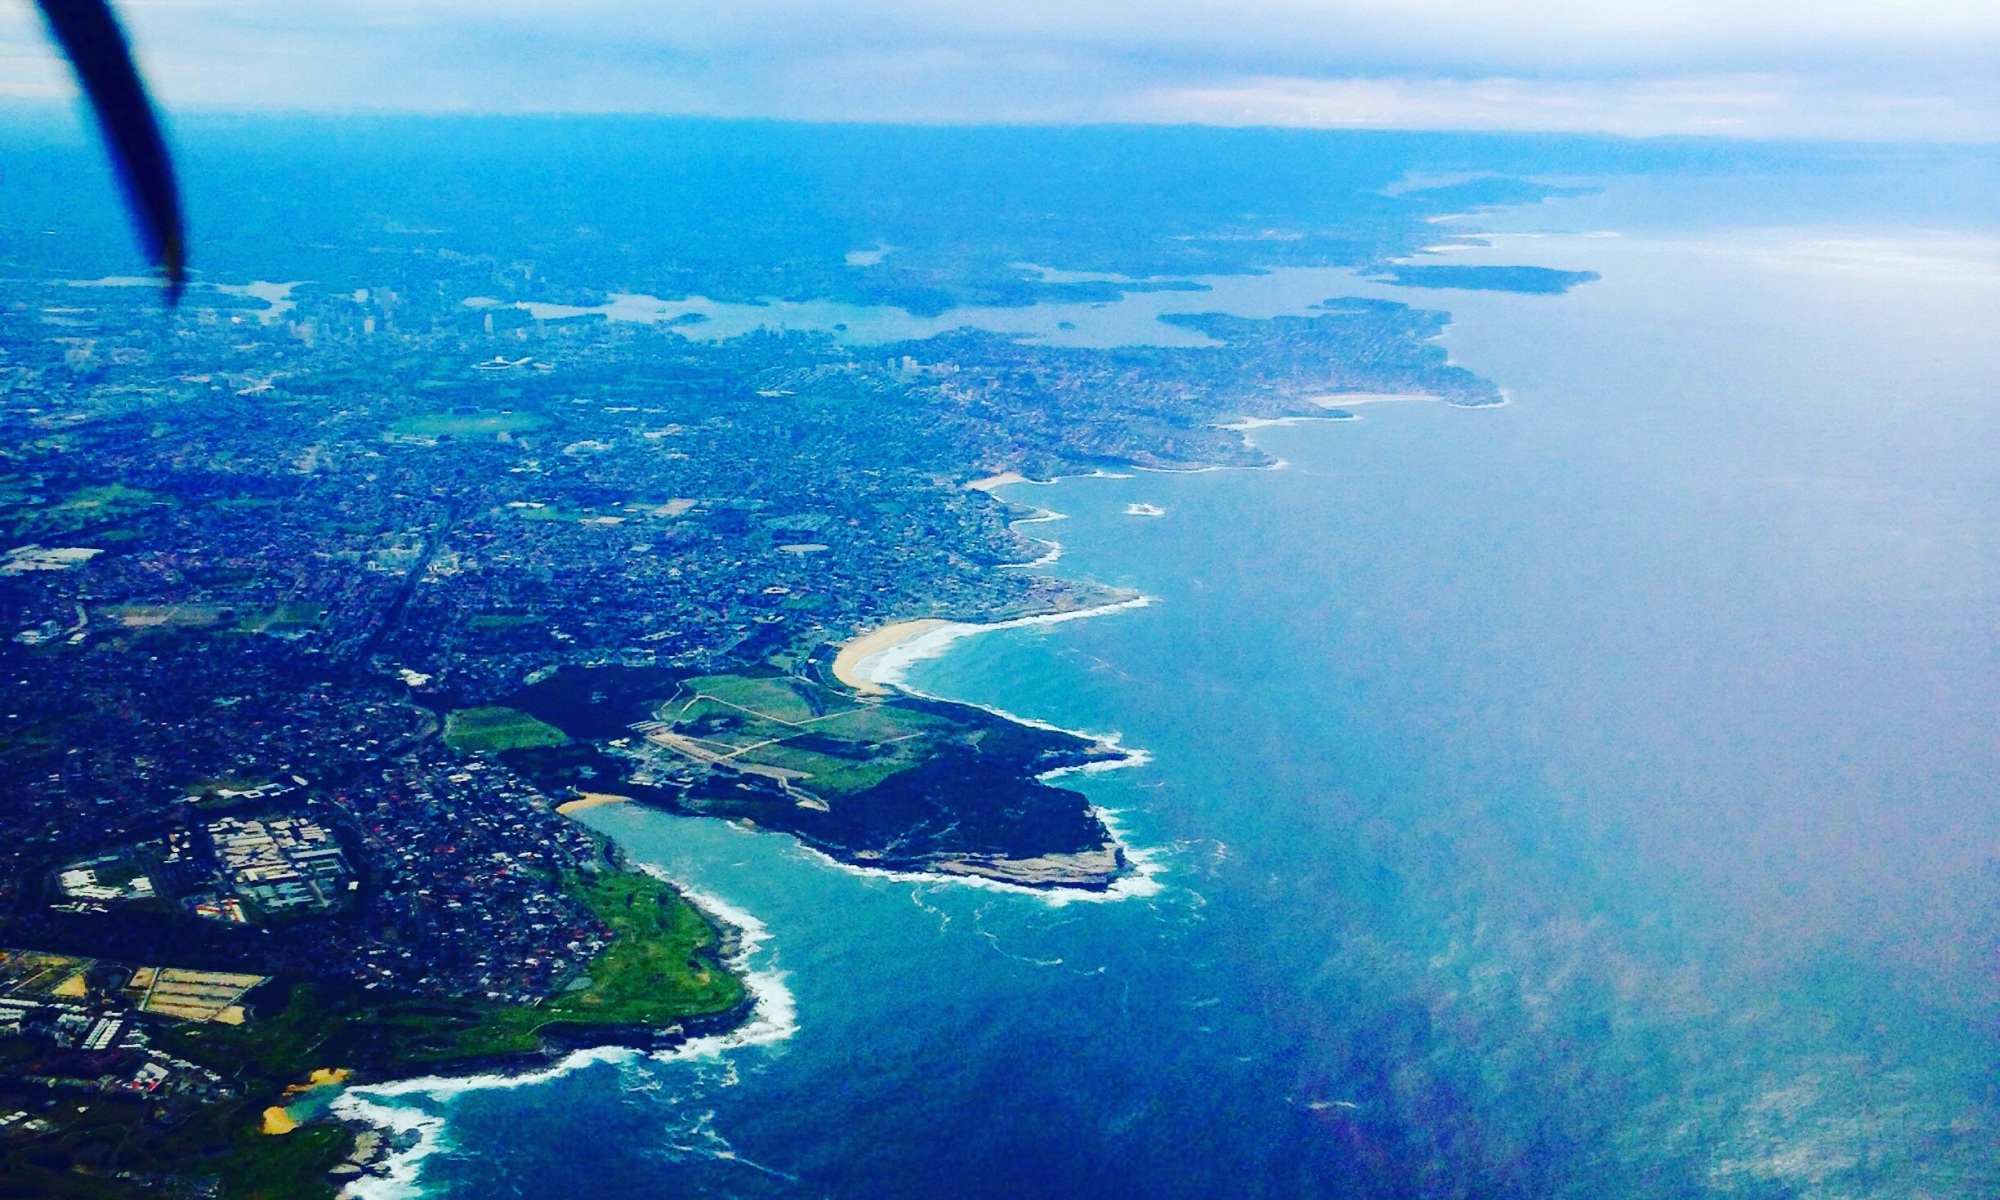 Flying into Sydney, view from the plane window